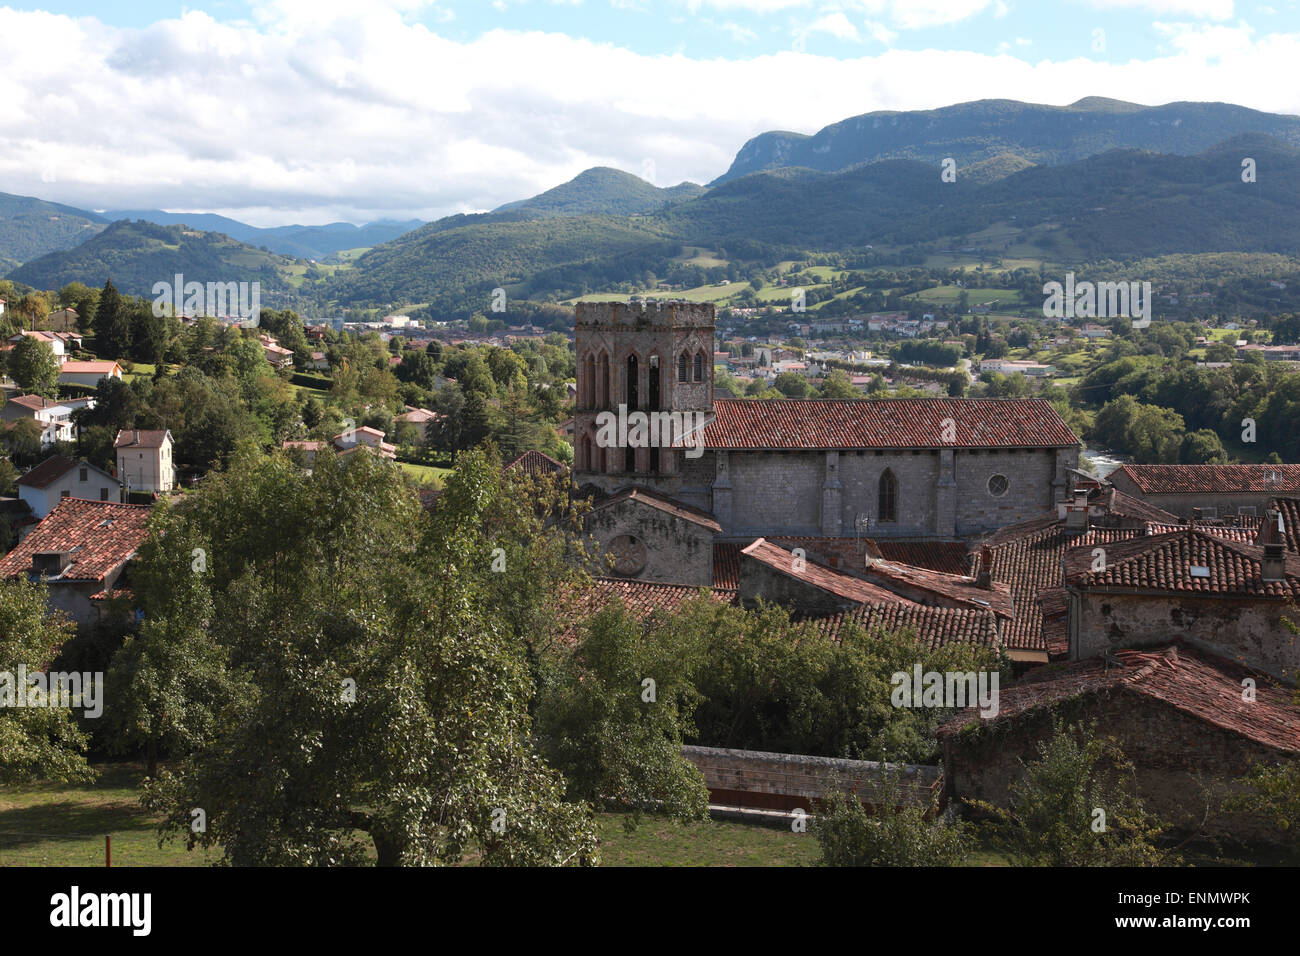 A view over the small town of Saint Lizier and its Romanesque Cathedral in Ariege, Midi Pyrenees, south west France Stock Photo